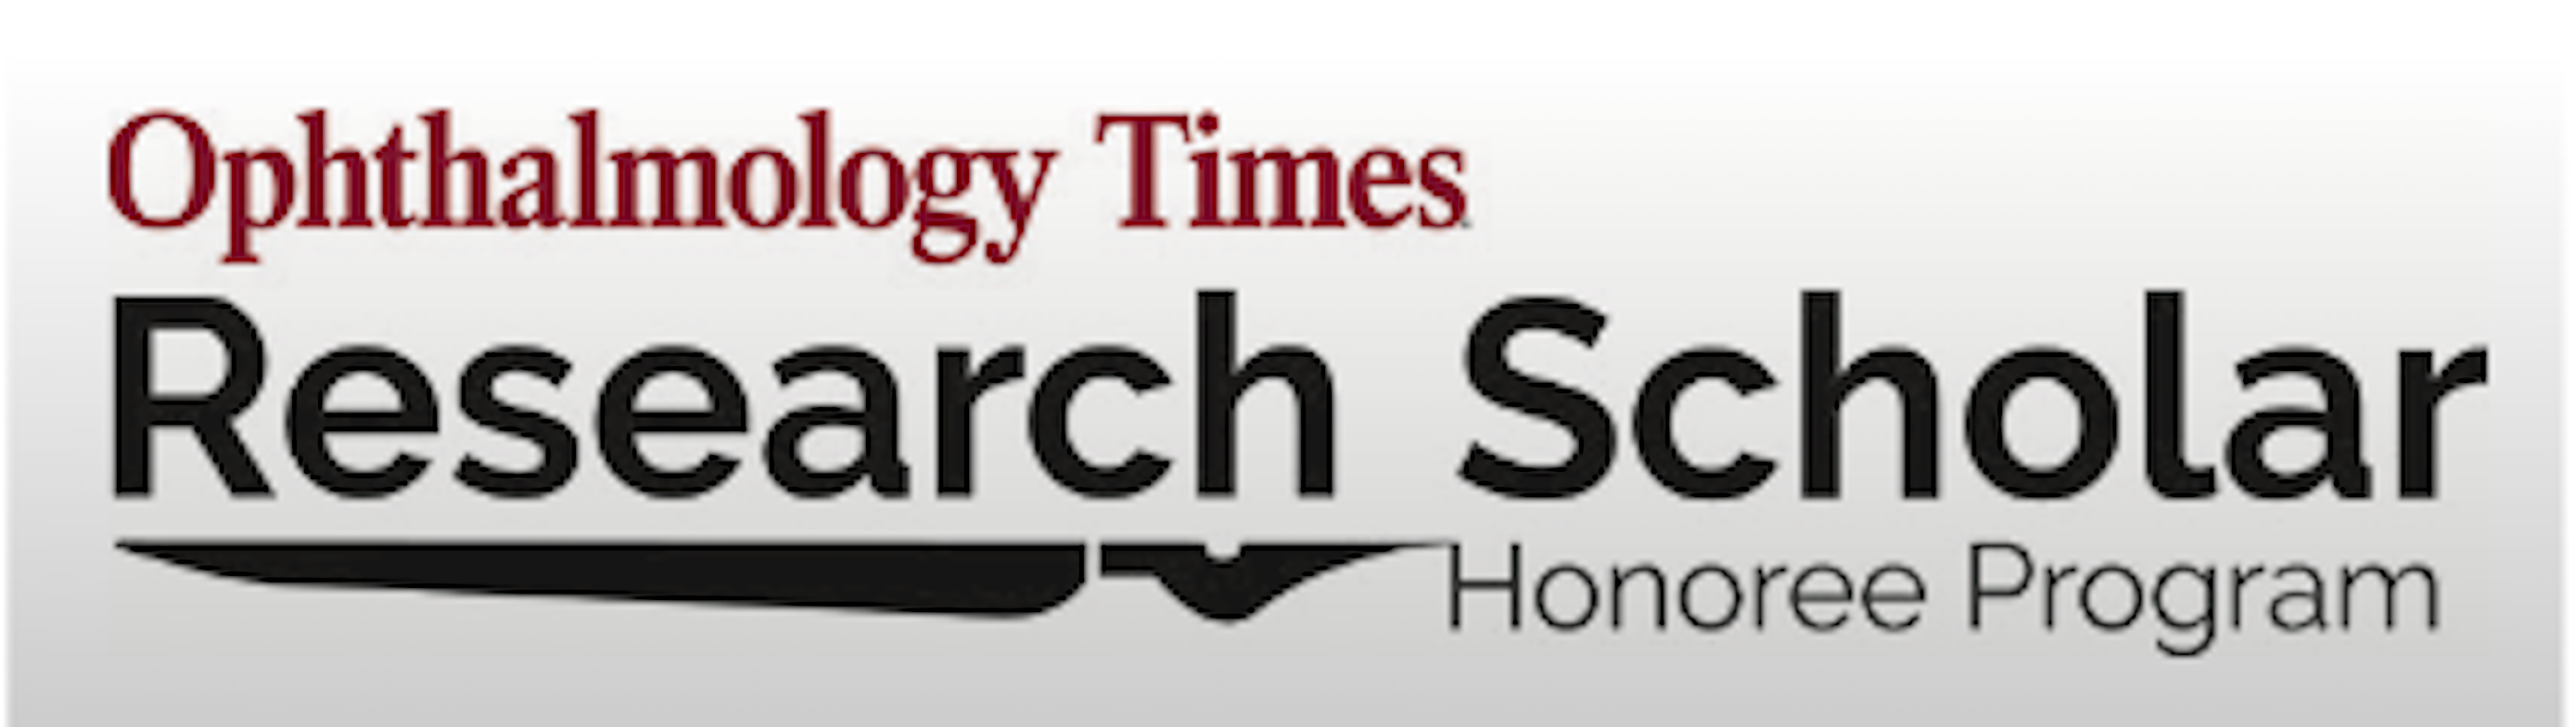 Ophthalmology Times® Research Scholar Honoree Program